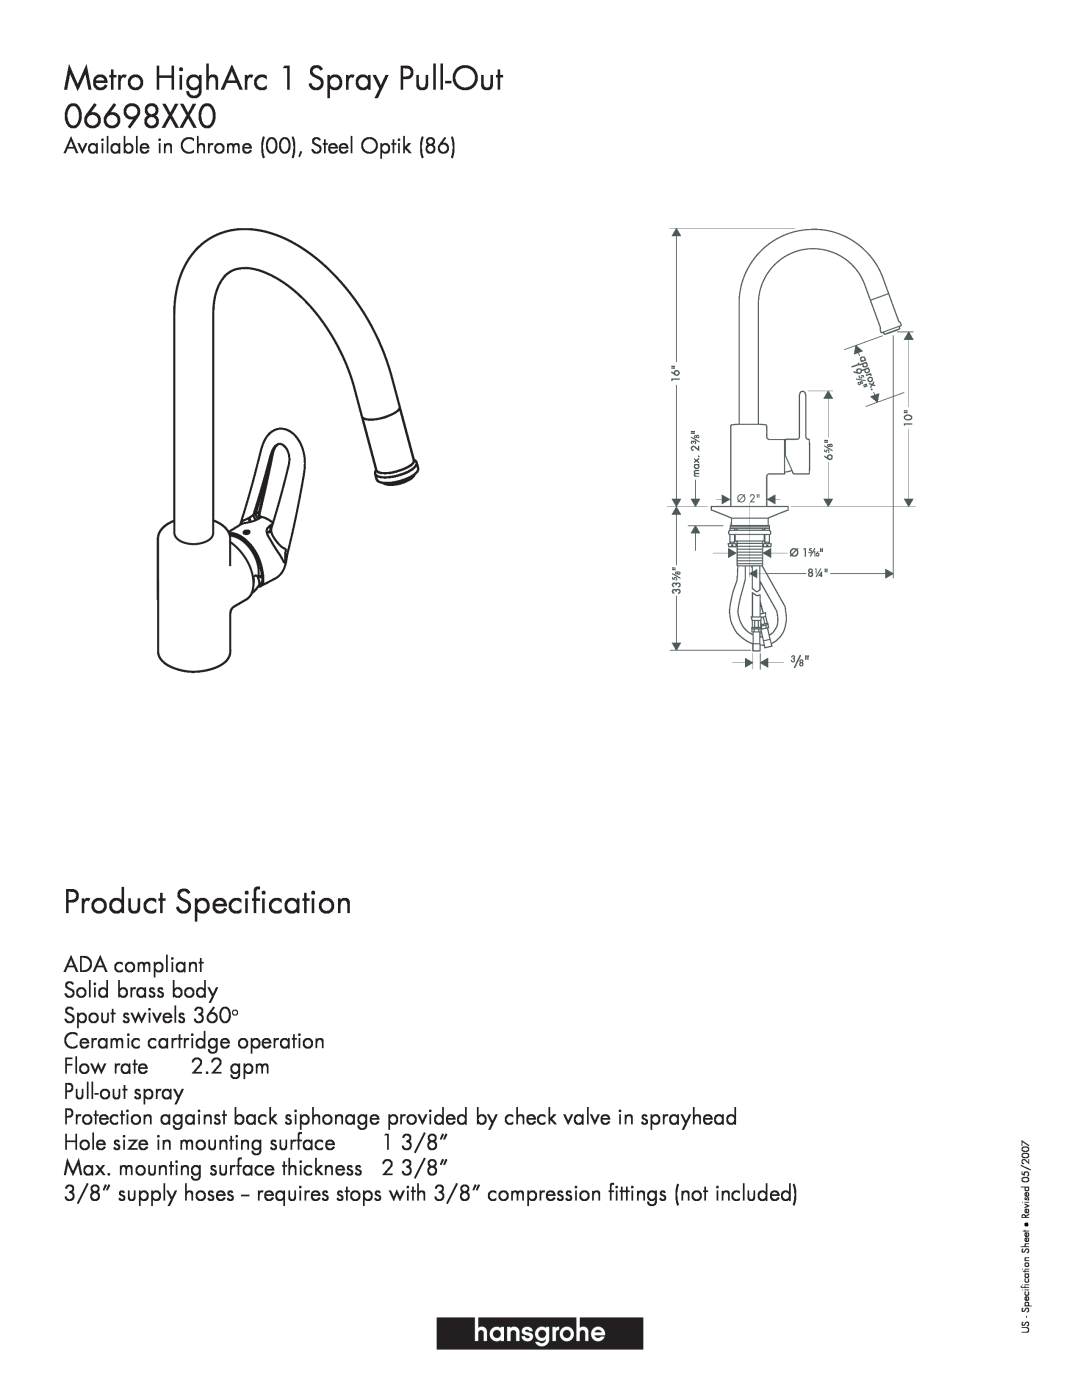 Hans Grohe 06698XX0 specifications Metro HighArc 1 Spray Pull-Out, Product Specification 